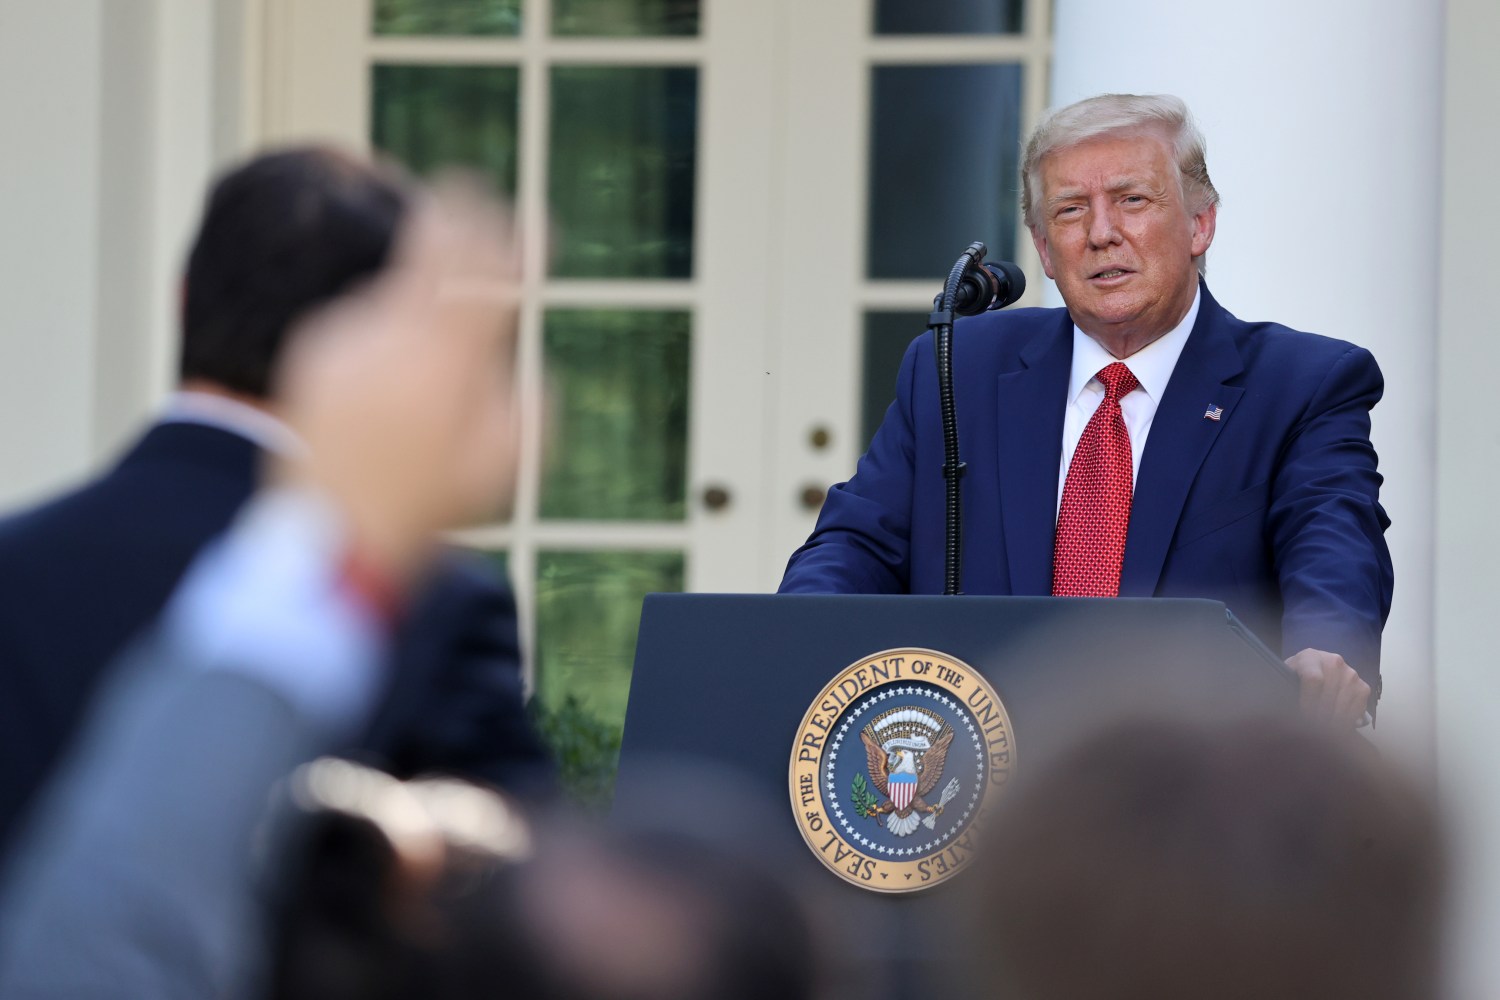 U.S. President Donald Trump attends a news conference in the Rose Garden at the White House in Washington, U.S., July 14, 2020. REUTERS/Jonathan Ernst